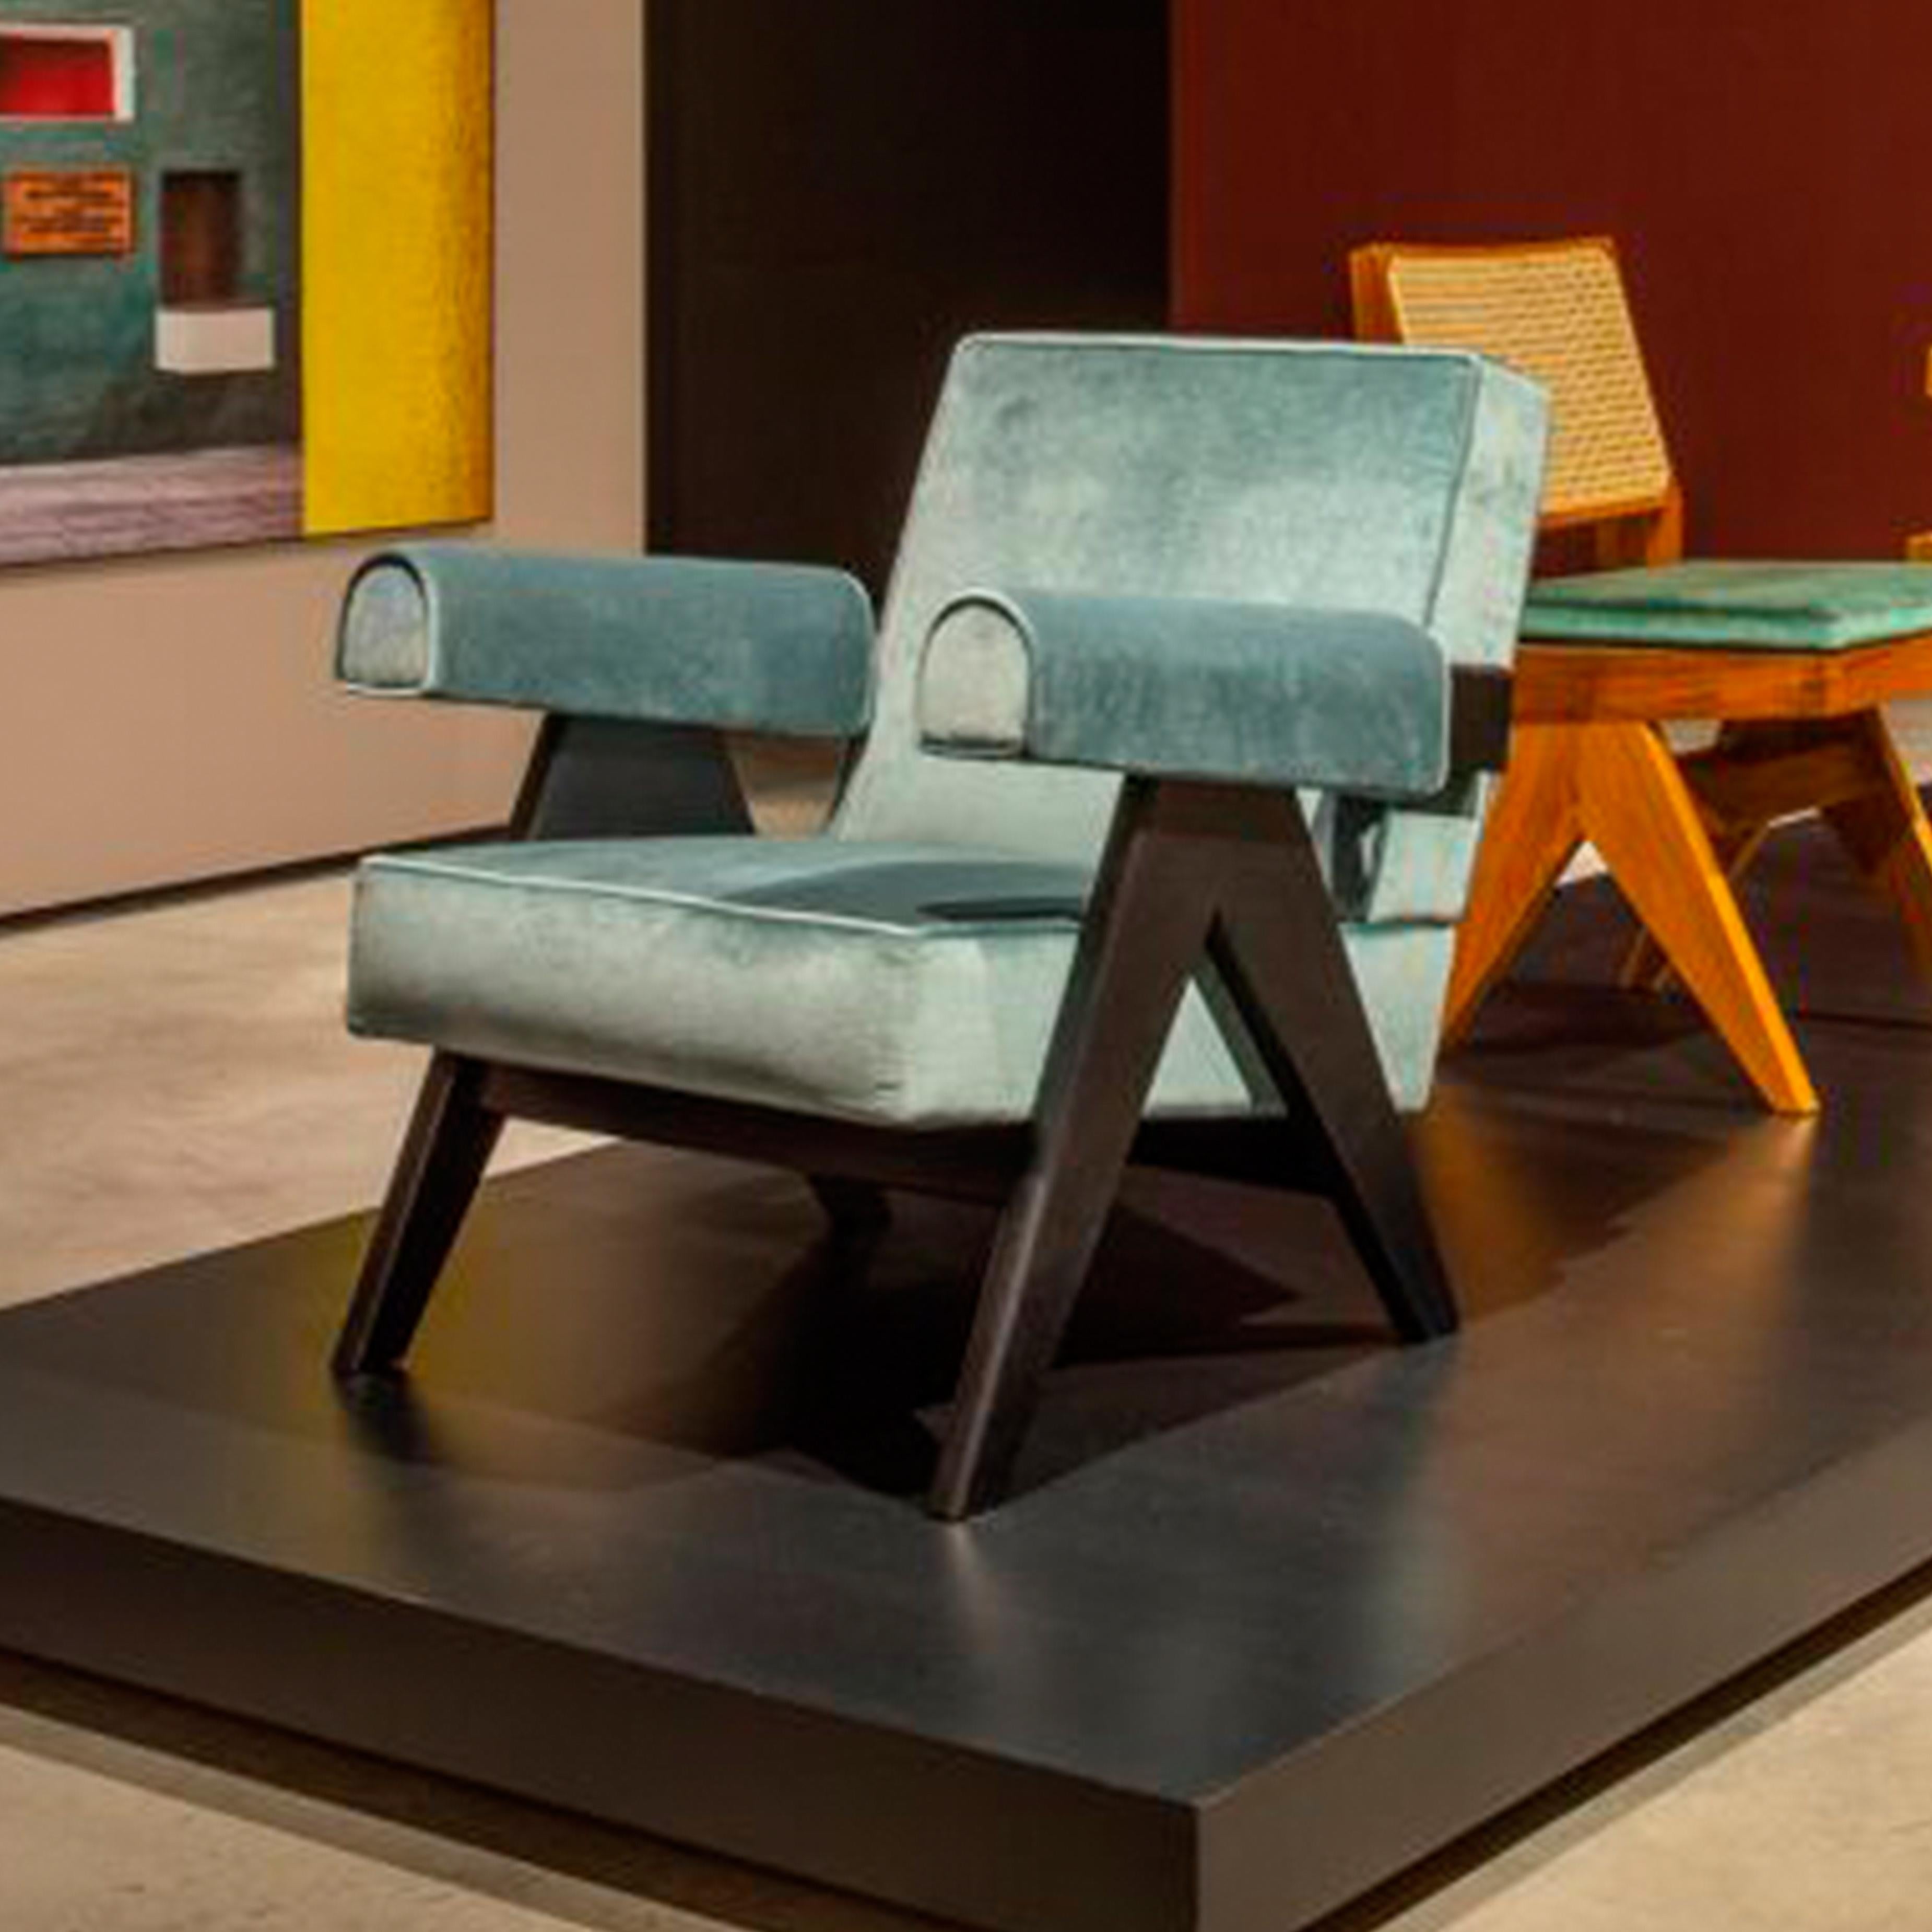 Armchairs designed by Pierre Jeanneret circa 1950, relaunched in 2019.
Manufactured by Cassina in Italy.

Included in UNESCO’s 2016 Cultural Heritage list, the extraordinary architecture of Le Corbusier’s Capitol Complex, designed by Chandigarh